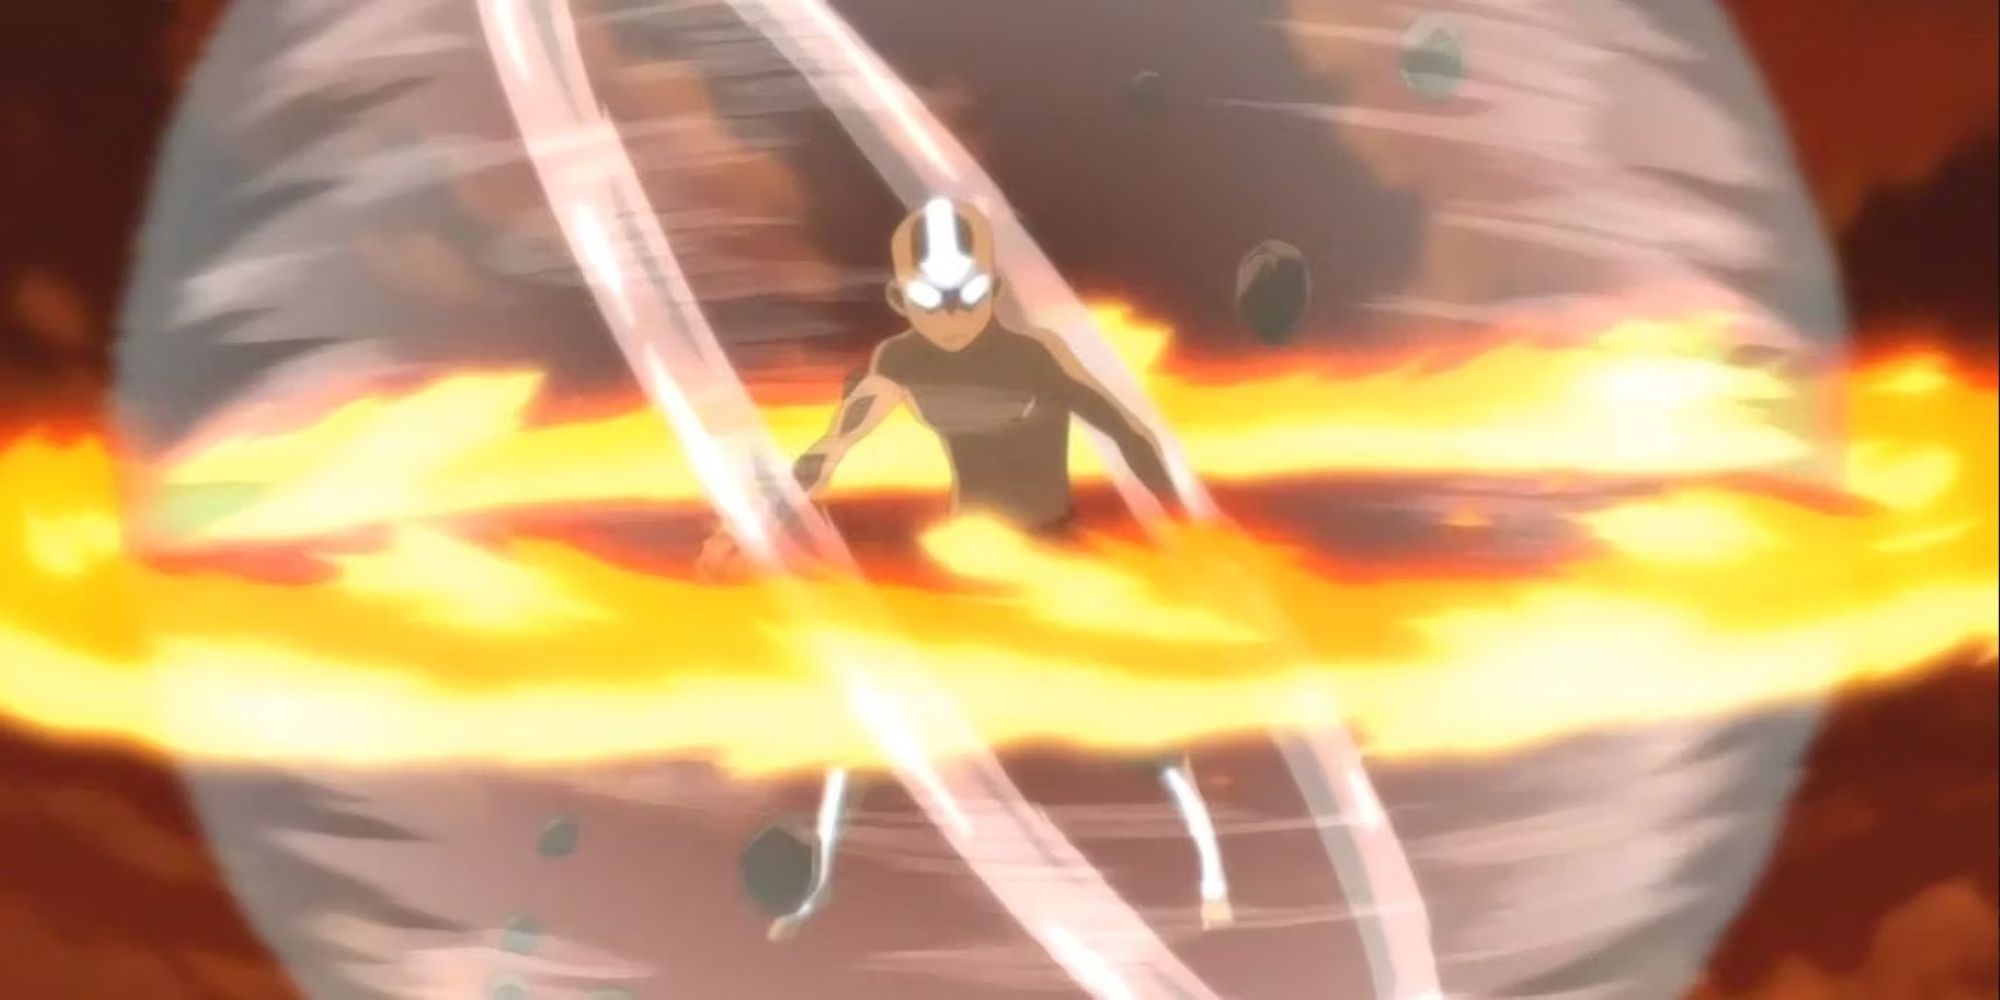 Avatar the Last Airbender Aang in an air bubble surrounded by a ring of fire while his eyes and arrow glow white